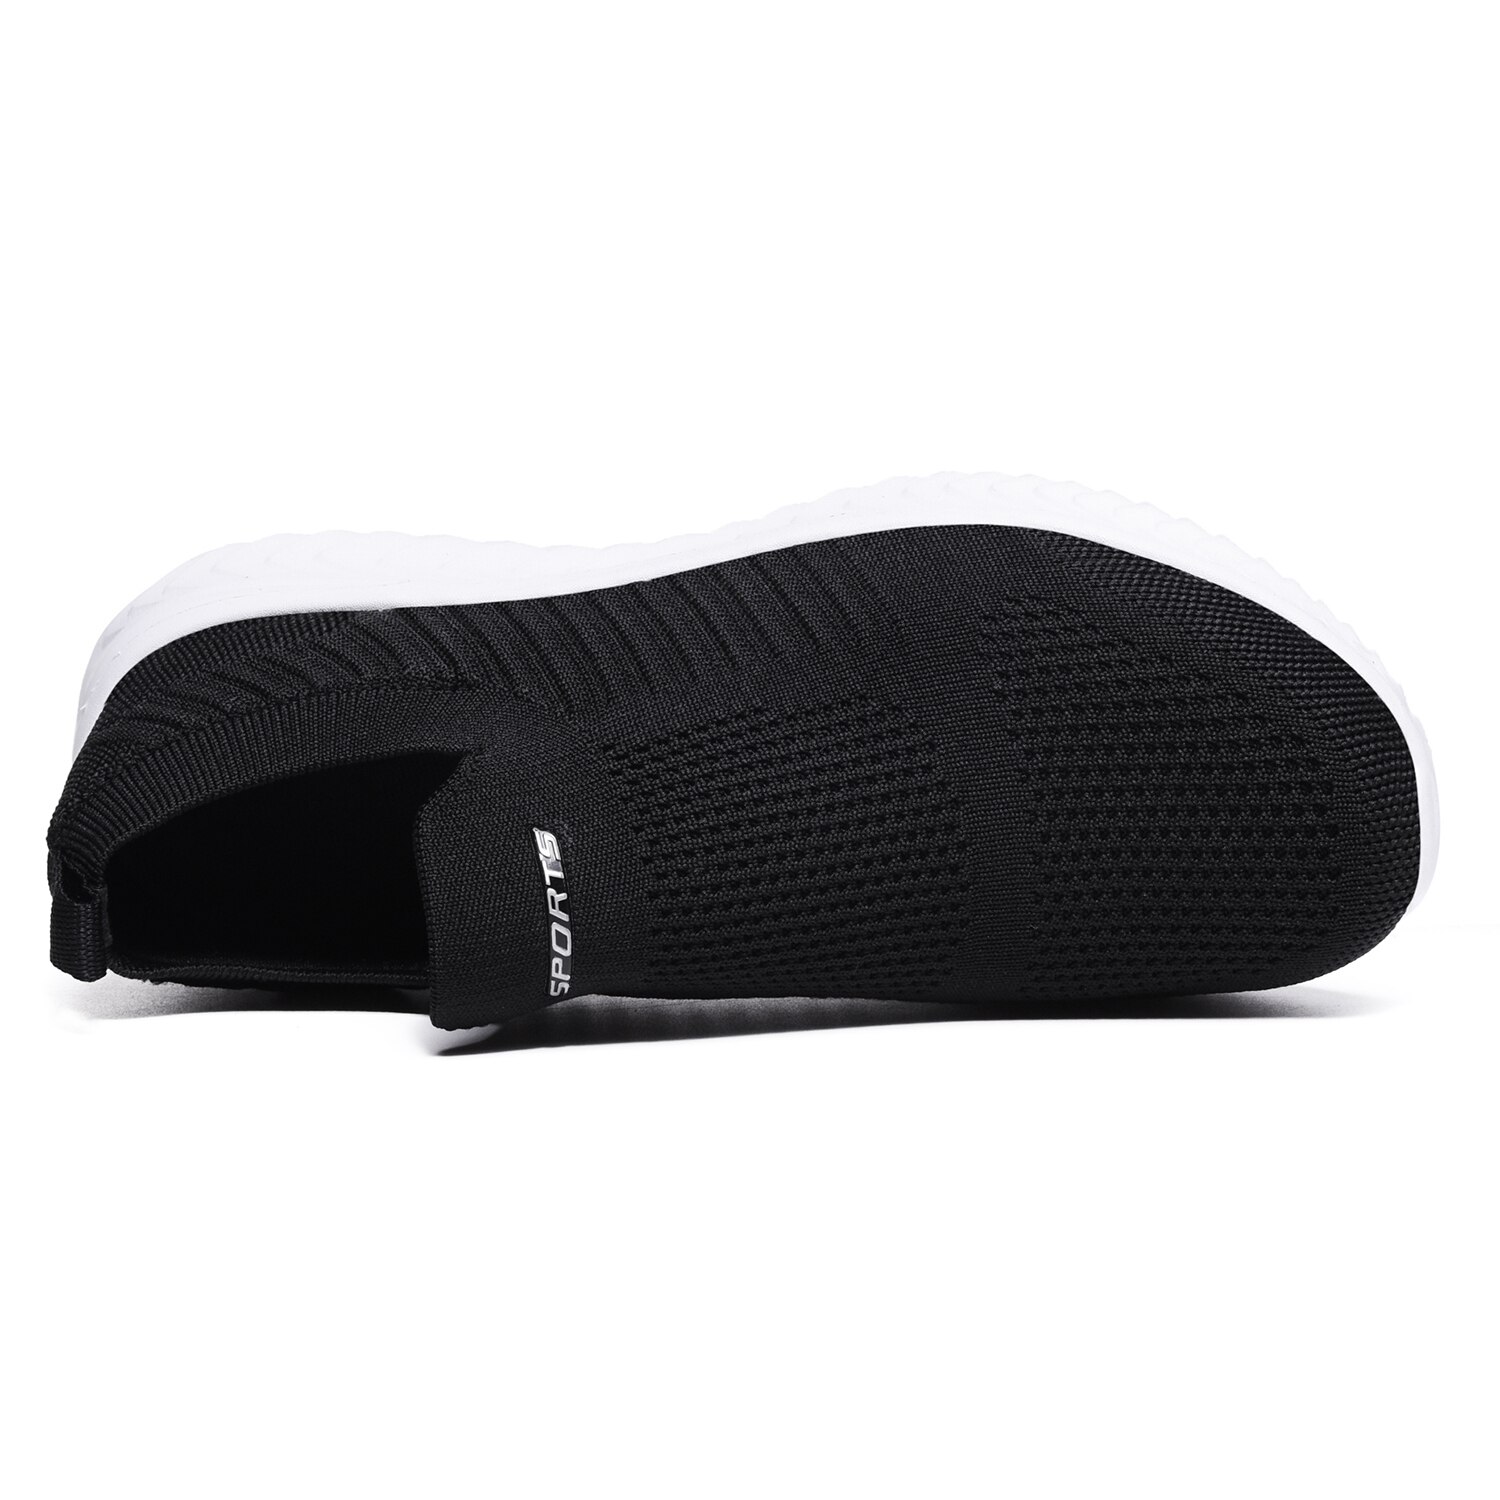 Shoes Men Sneakers Men Comfortable Slip On Trainer casual Lazy Shoes Lightweight Couple Sock Sneakers Hombre Footwear